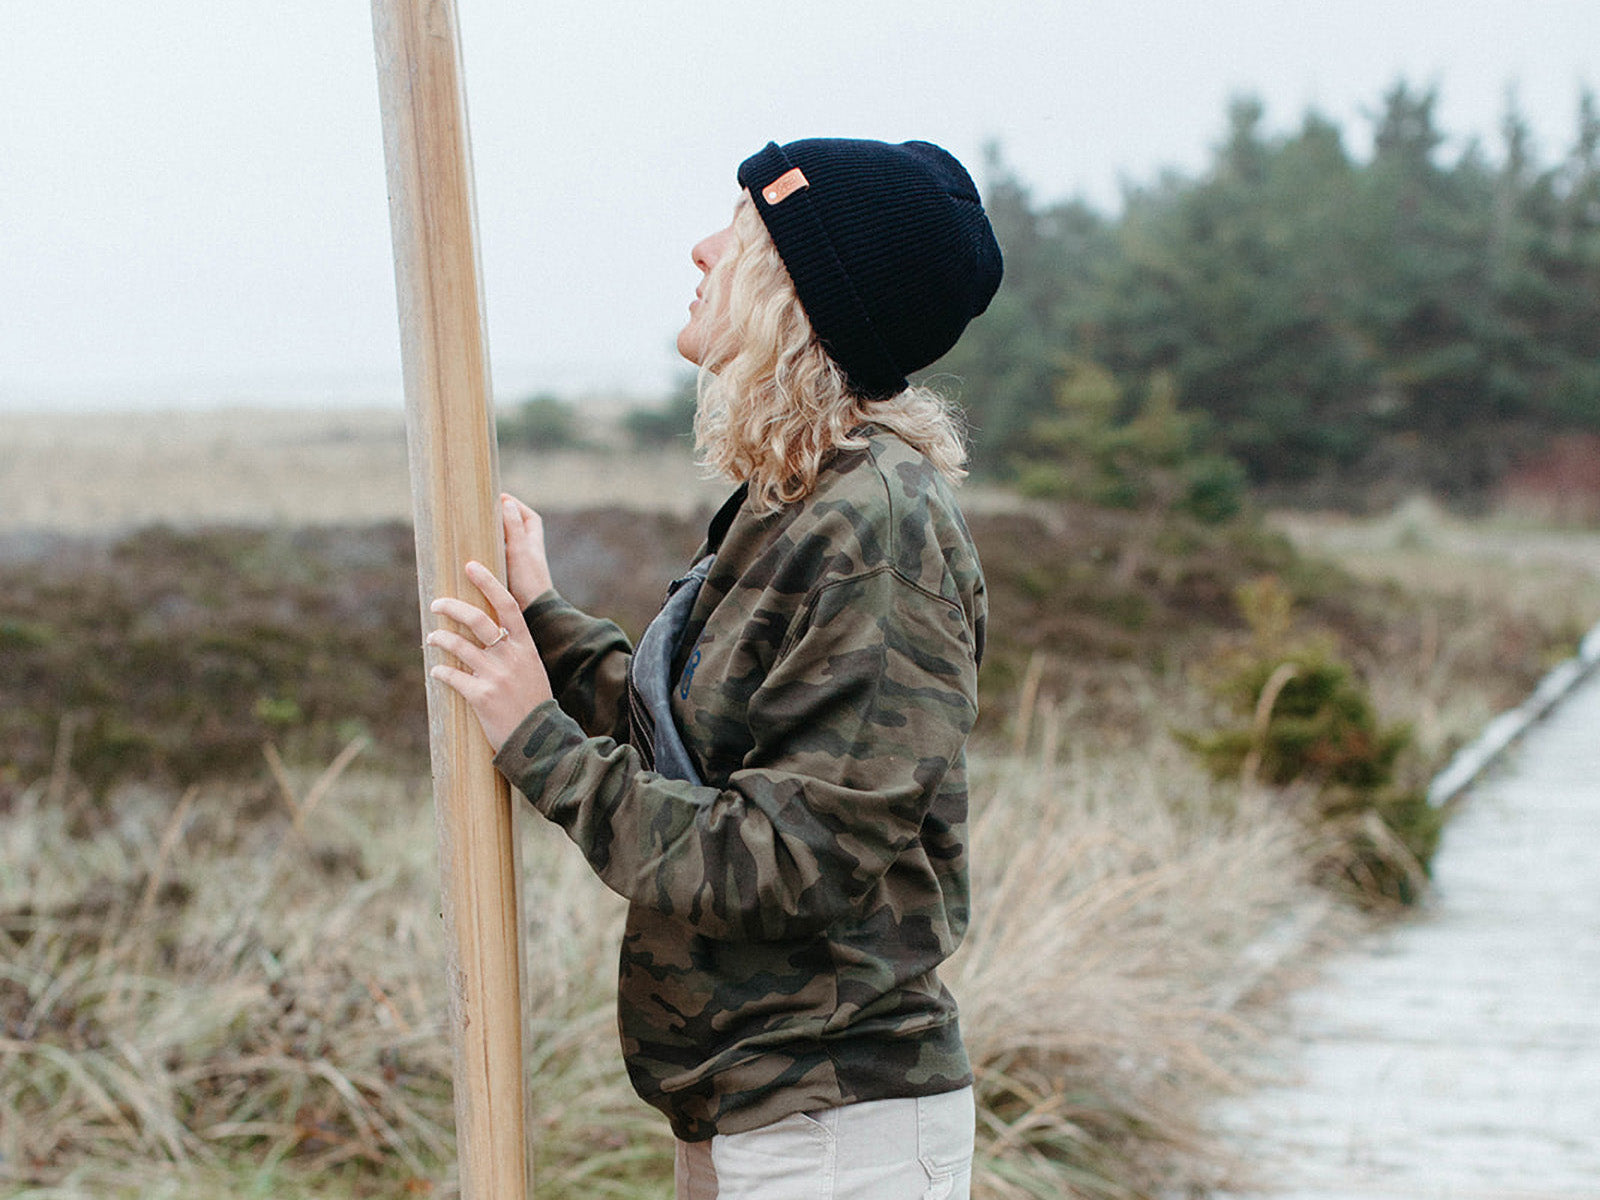 Nicole holding and looking up at her surfboard, wearing a black supply logo toque